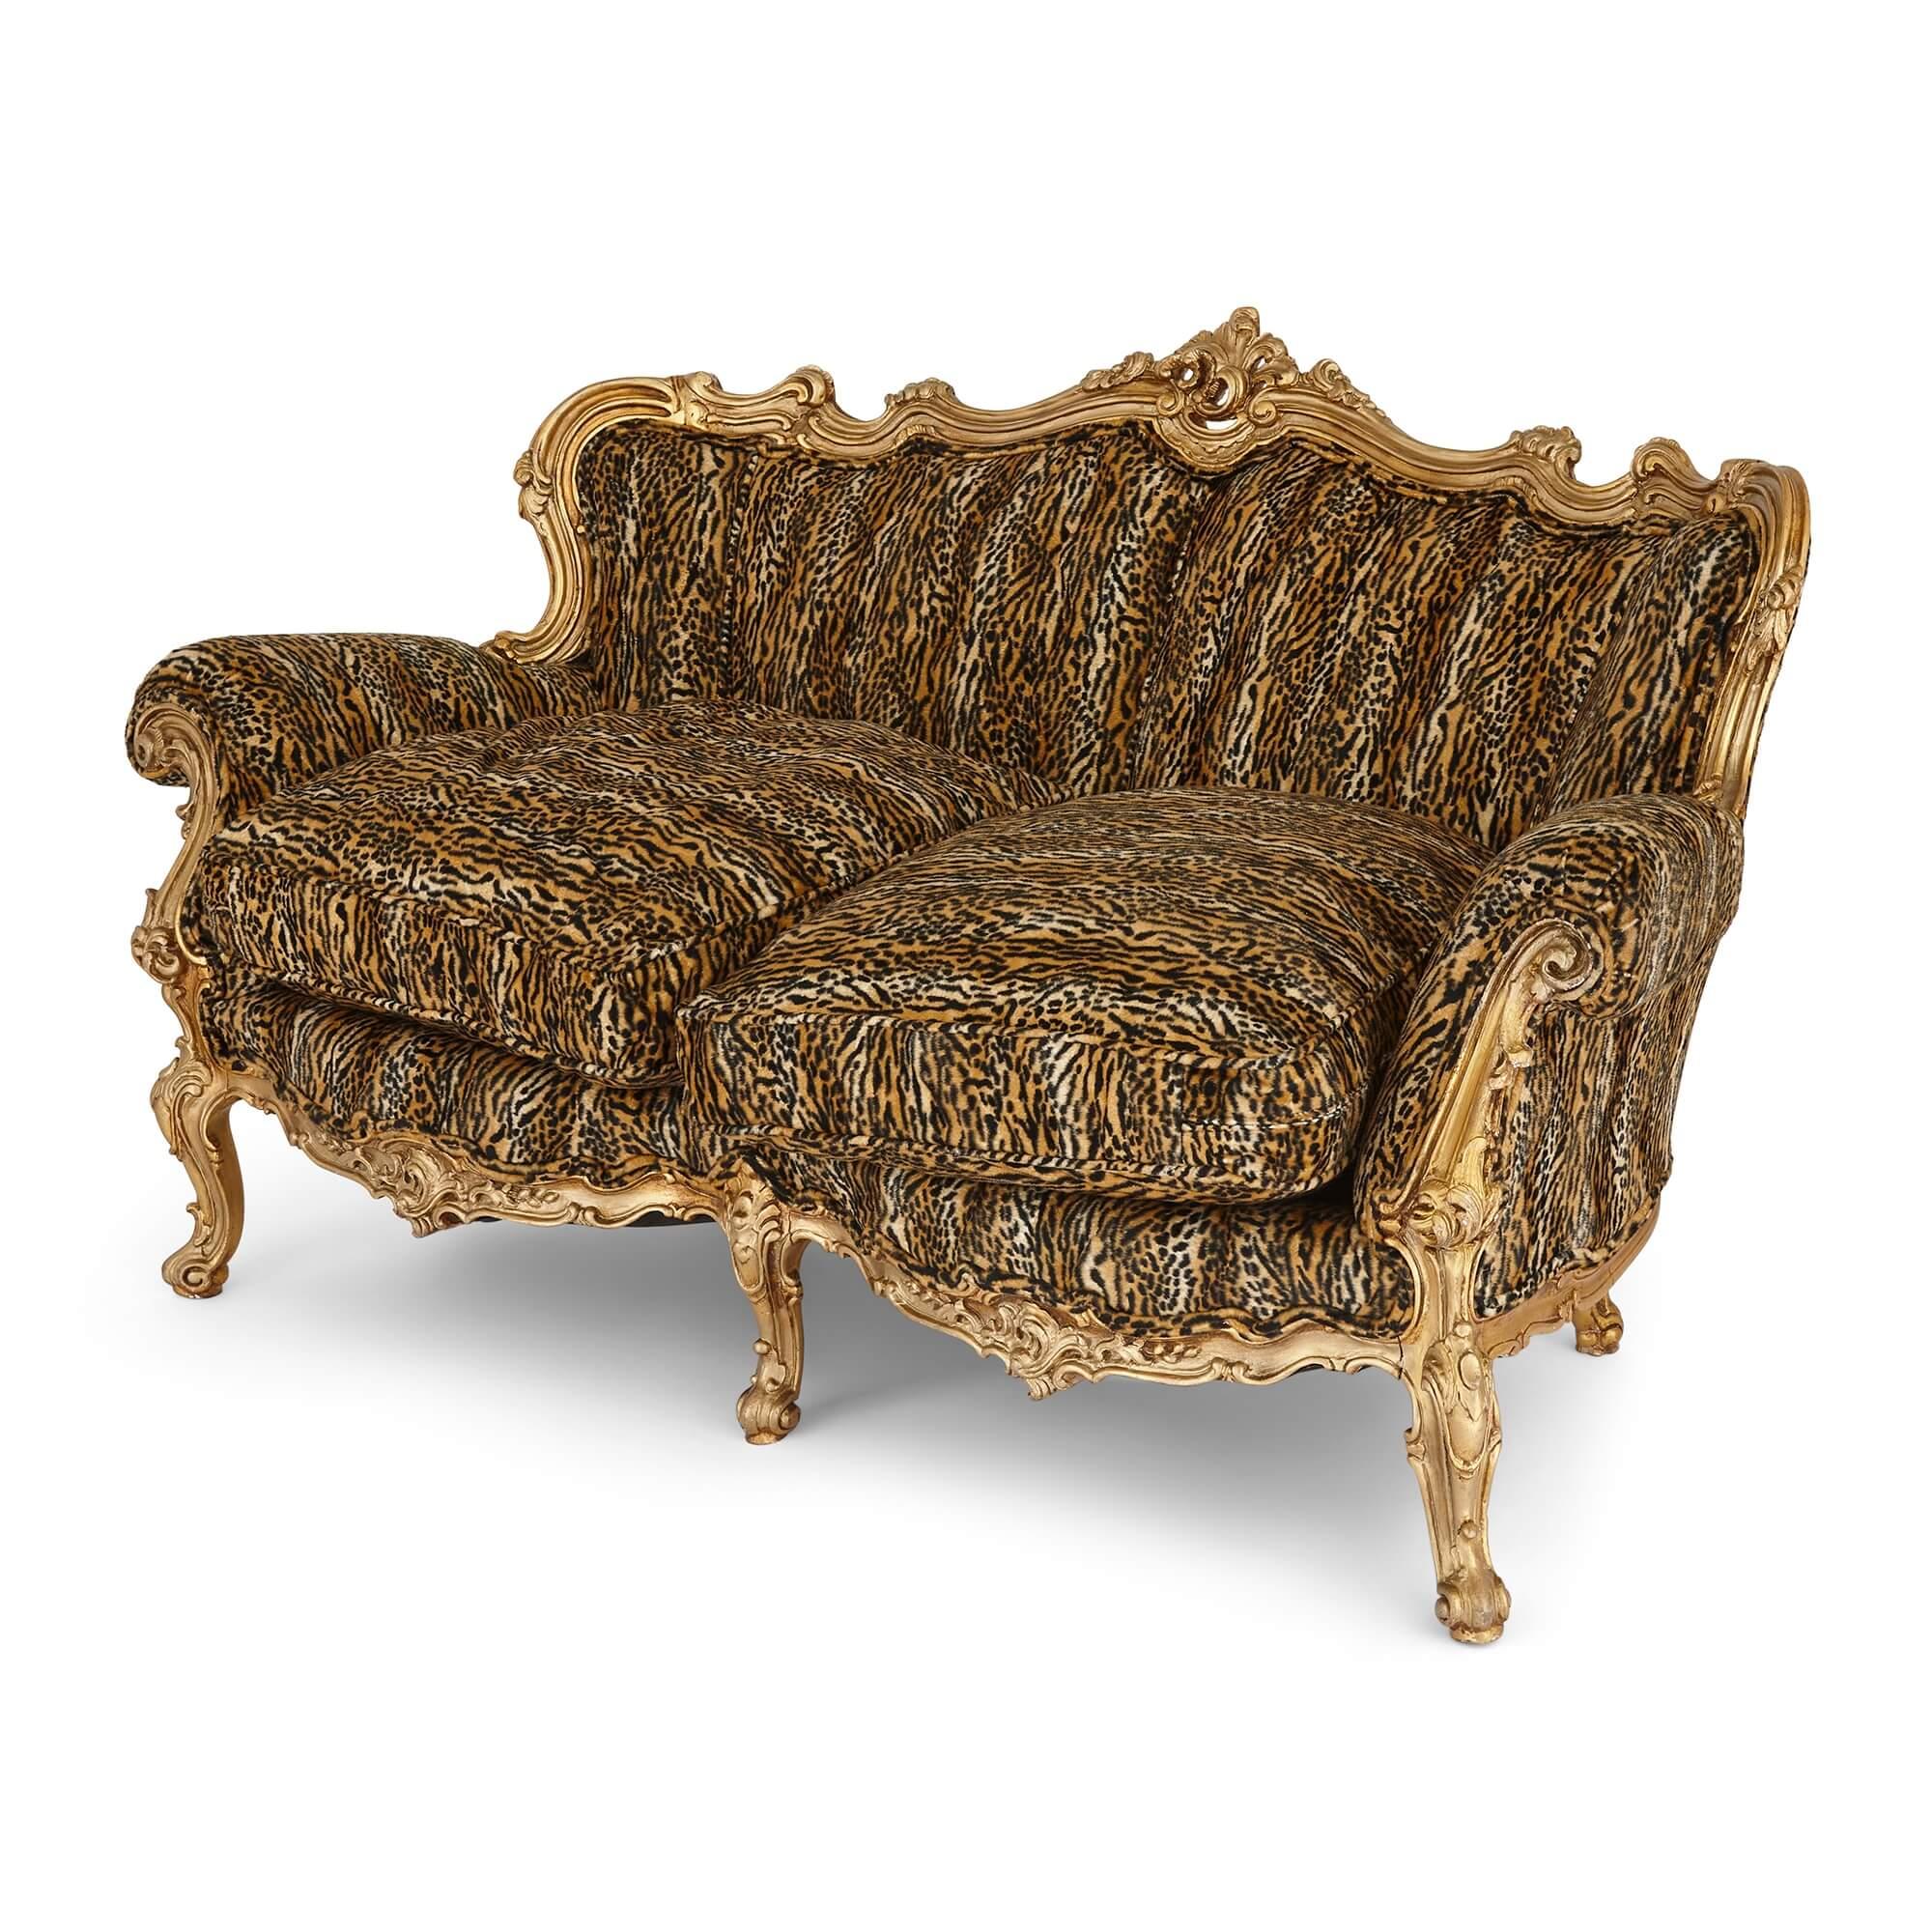 Modern Pair of Large Ornate Giltwood Antique Sofas For Sale